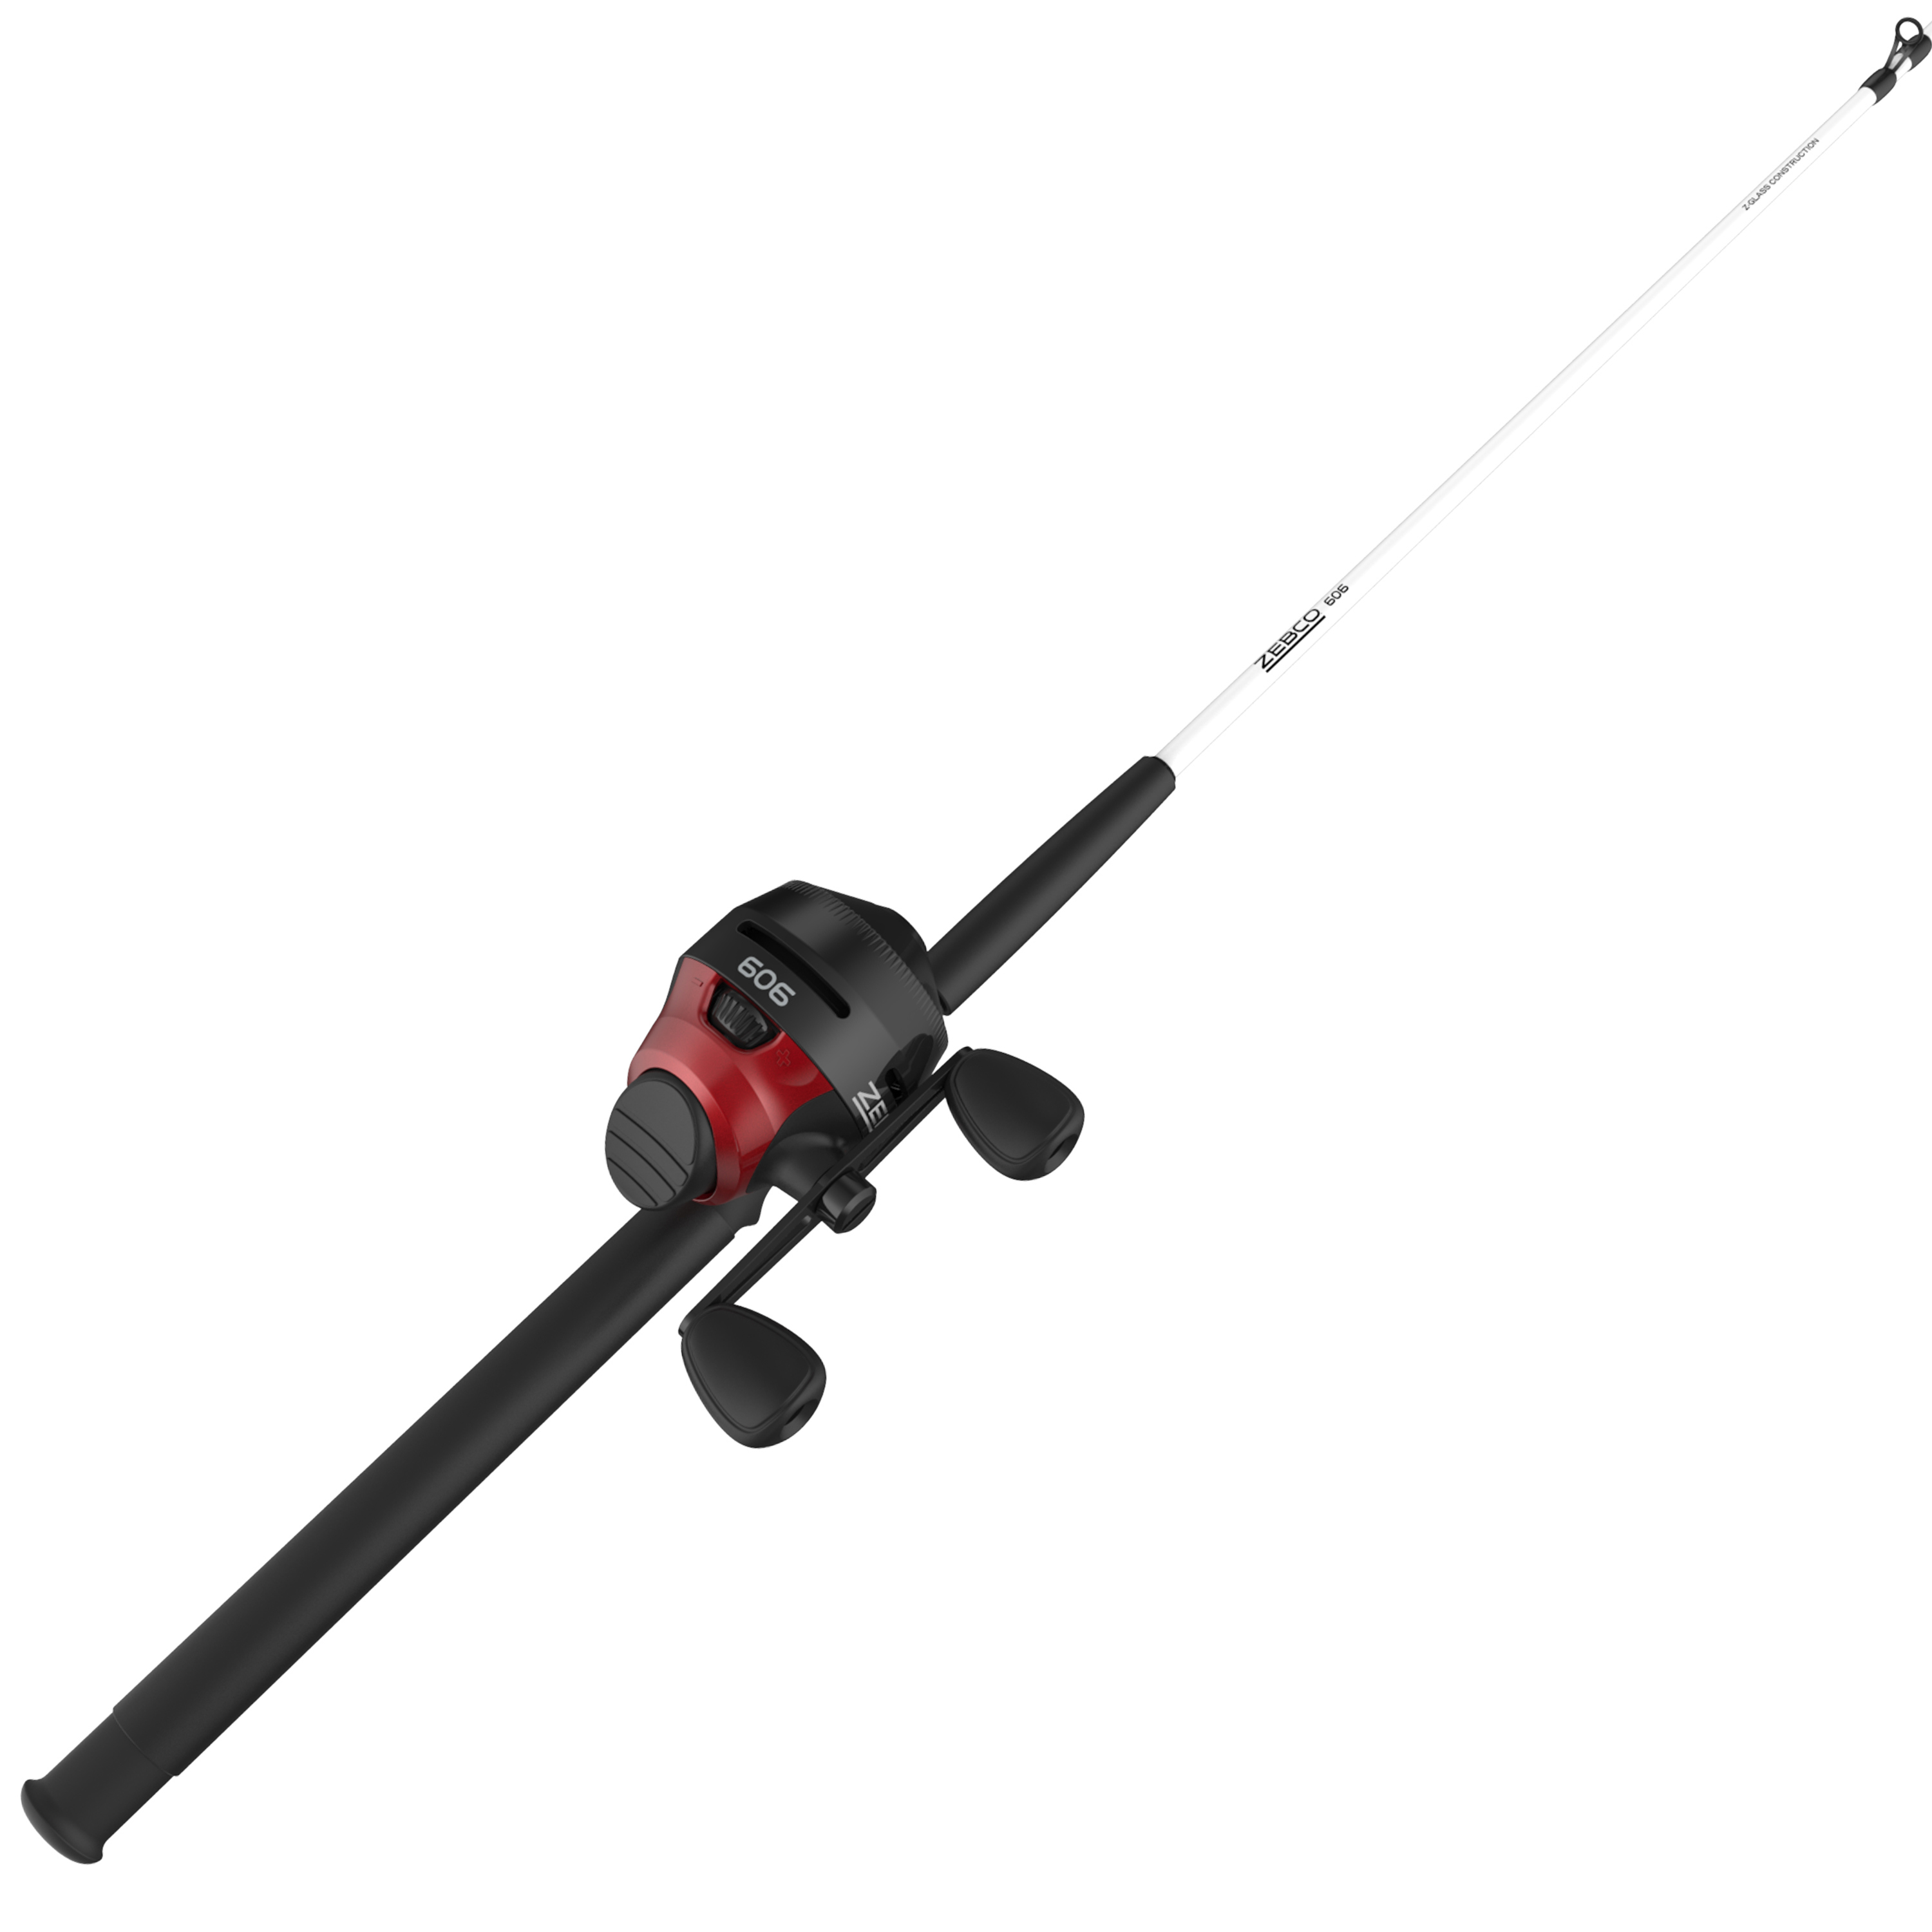 Zebco 33 Micro Triggerspin Spincast Reel and Telescopic Fishing Rod Combo,  Extendable 19-Inch to 5-Foot Telescopic Fishing Pole, QuickSet Anti-Reverse